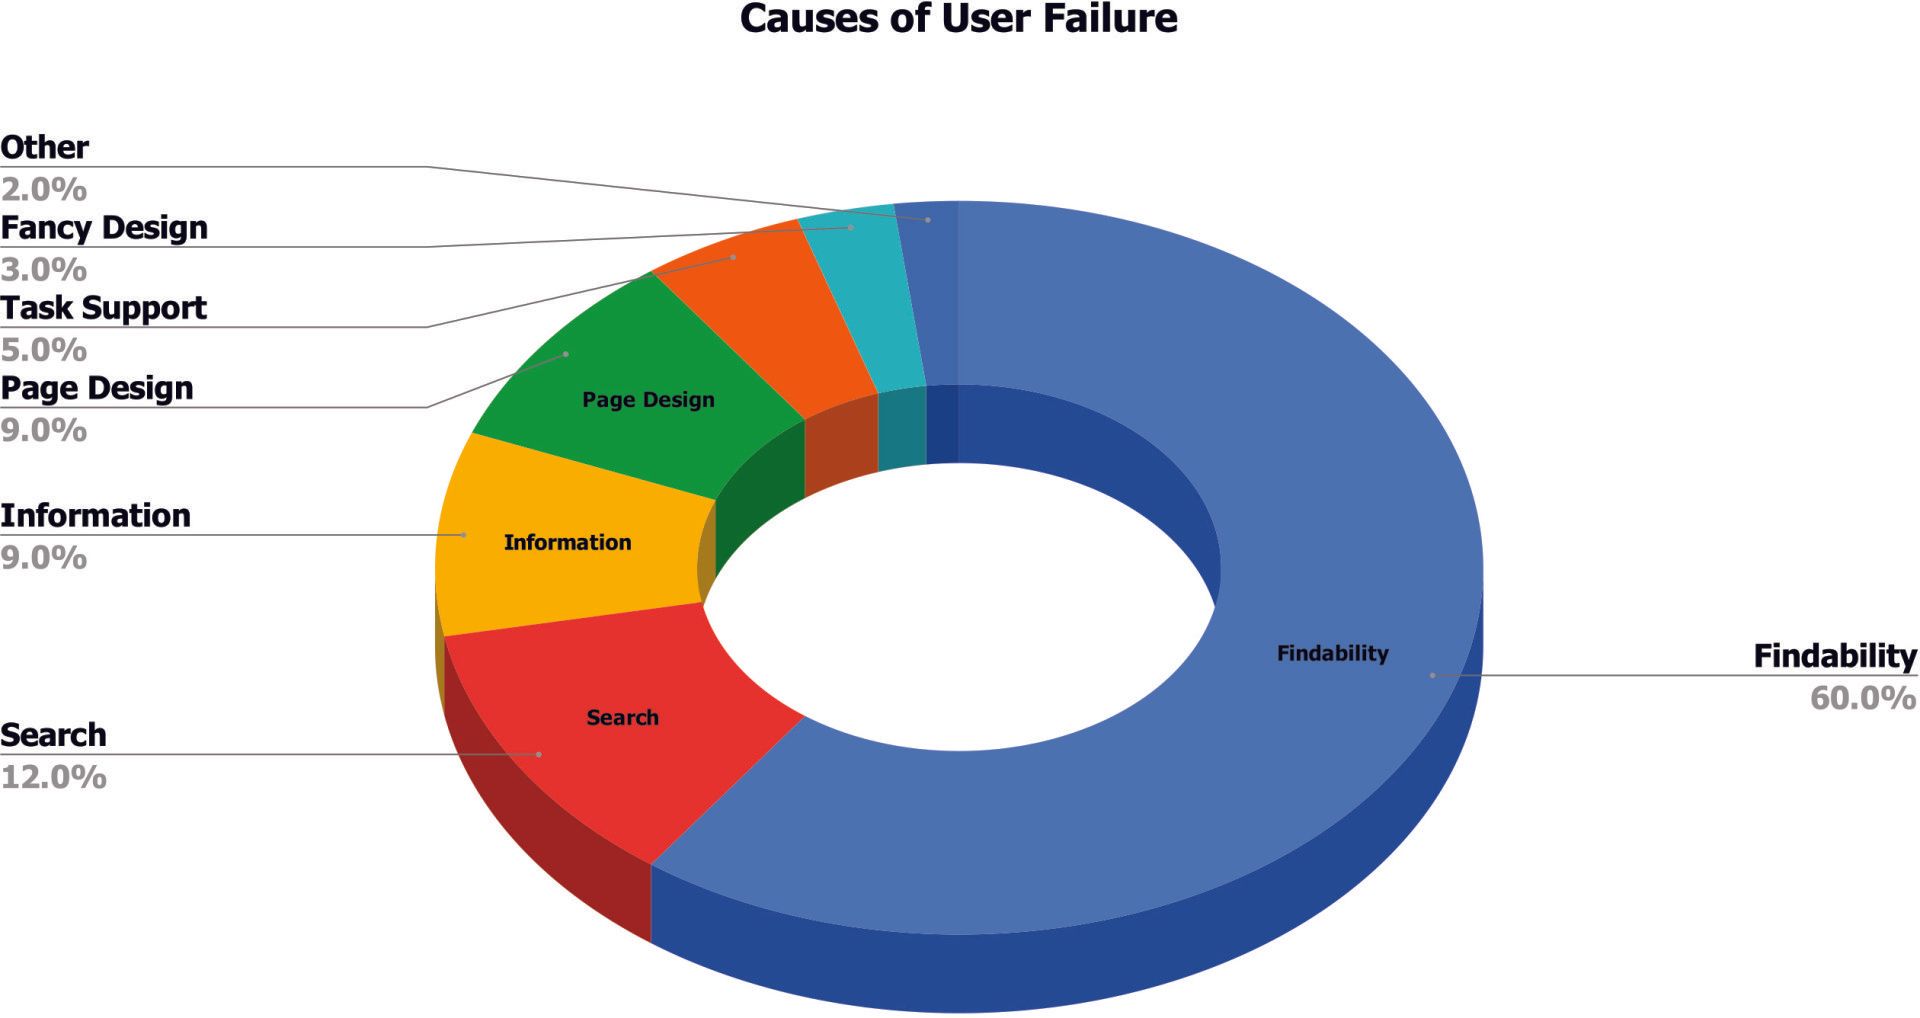 Causes of User Failure